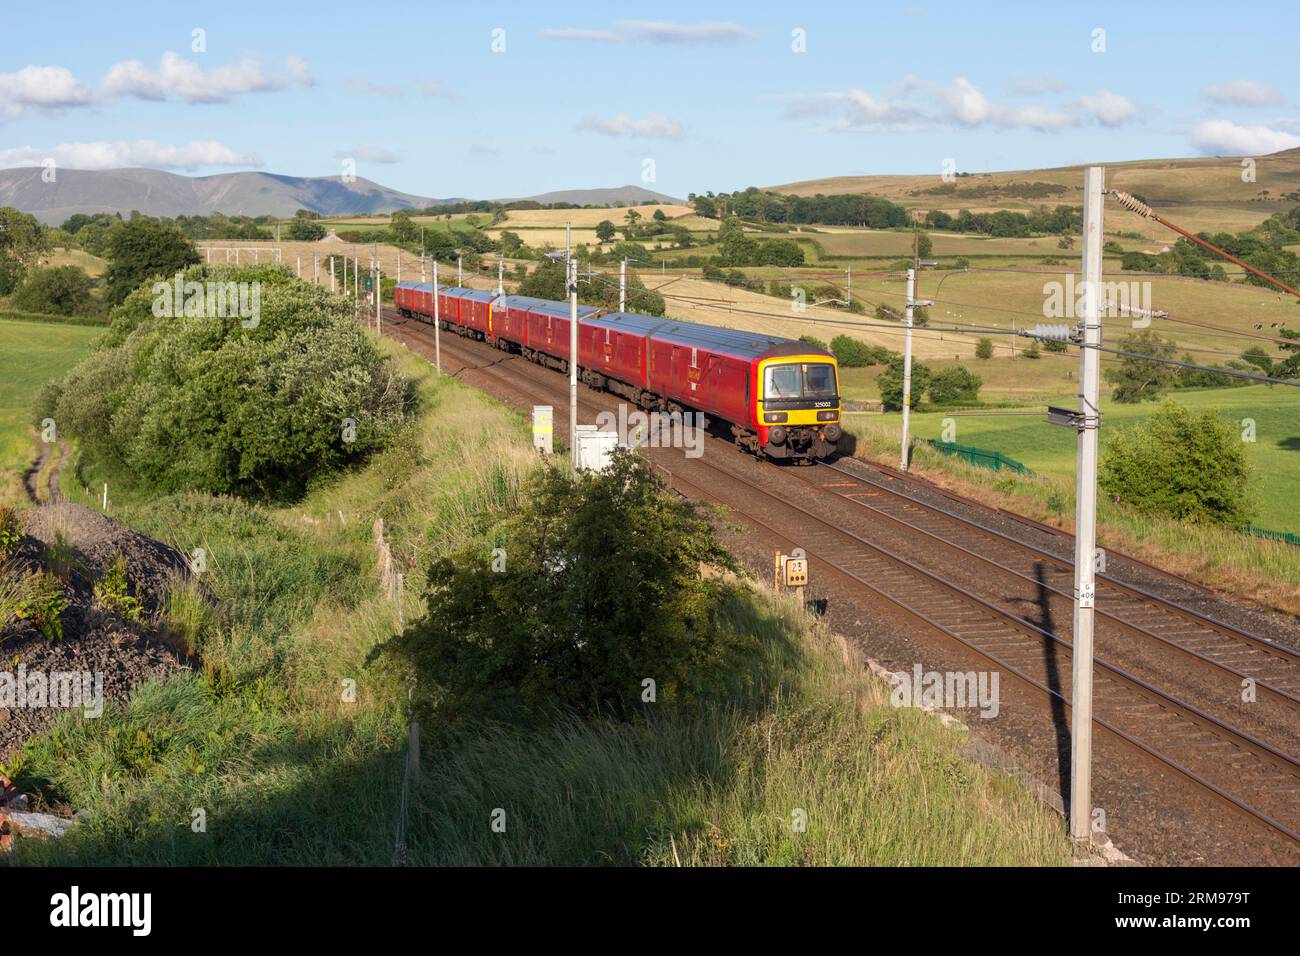 Royal Mail class 325 freight multiple units on the west coast mainline in Cumbria with Shieldmuir to Warrington working Stock Photo